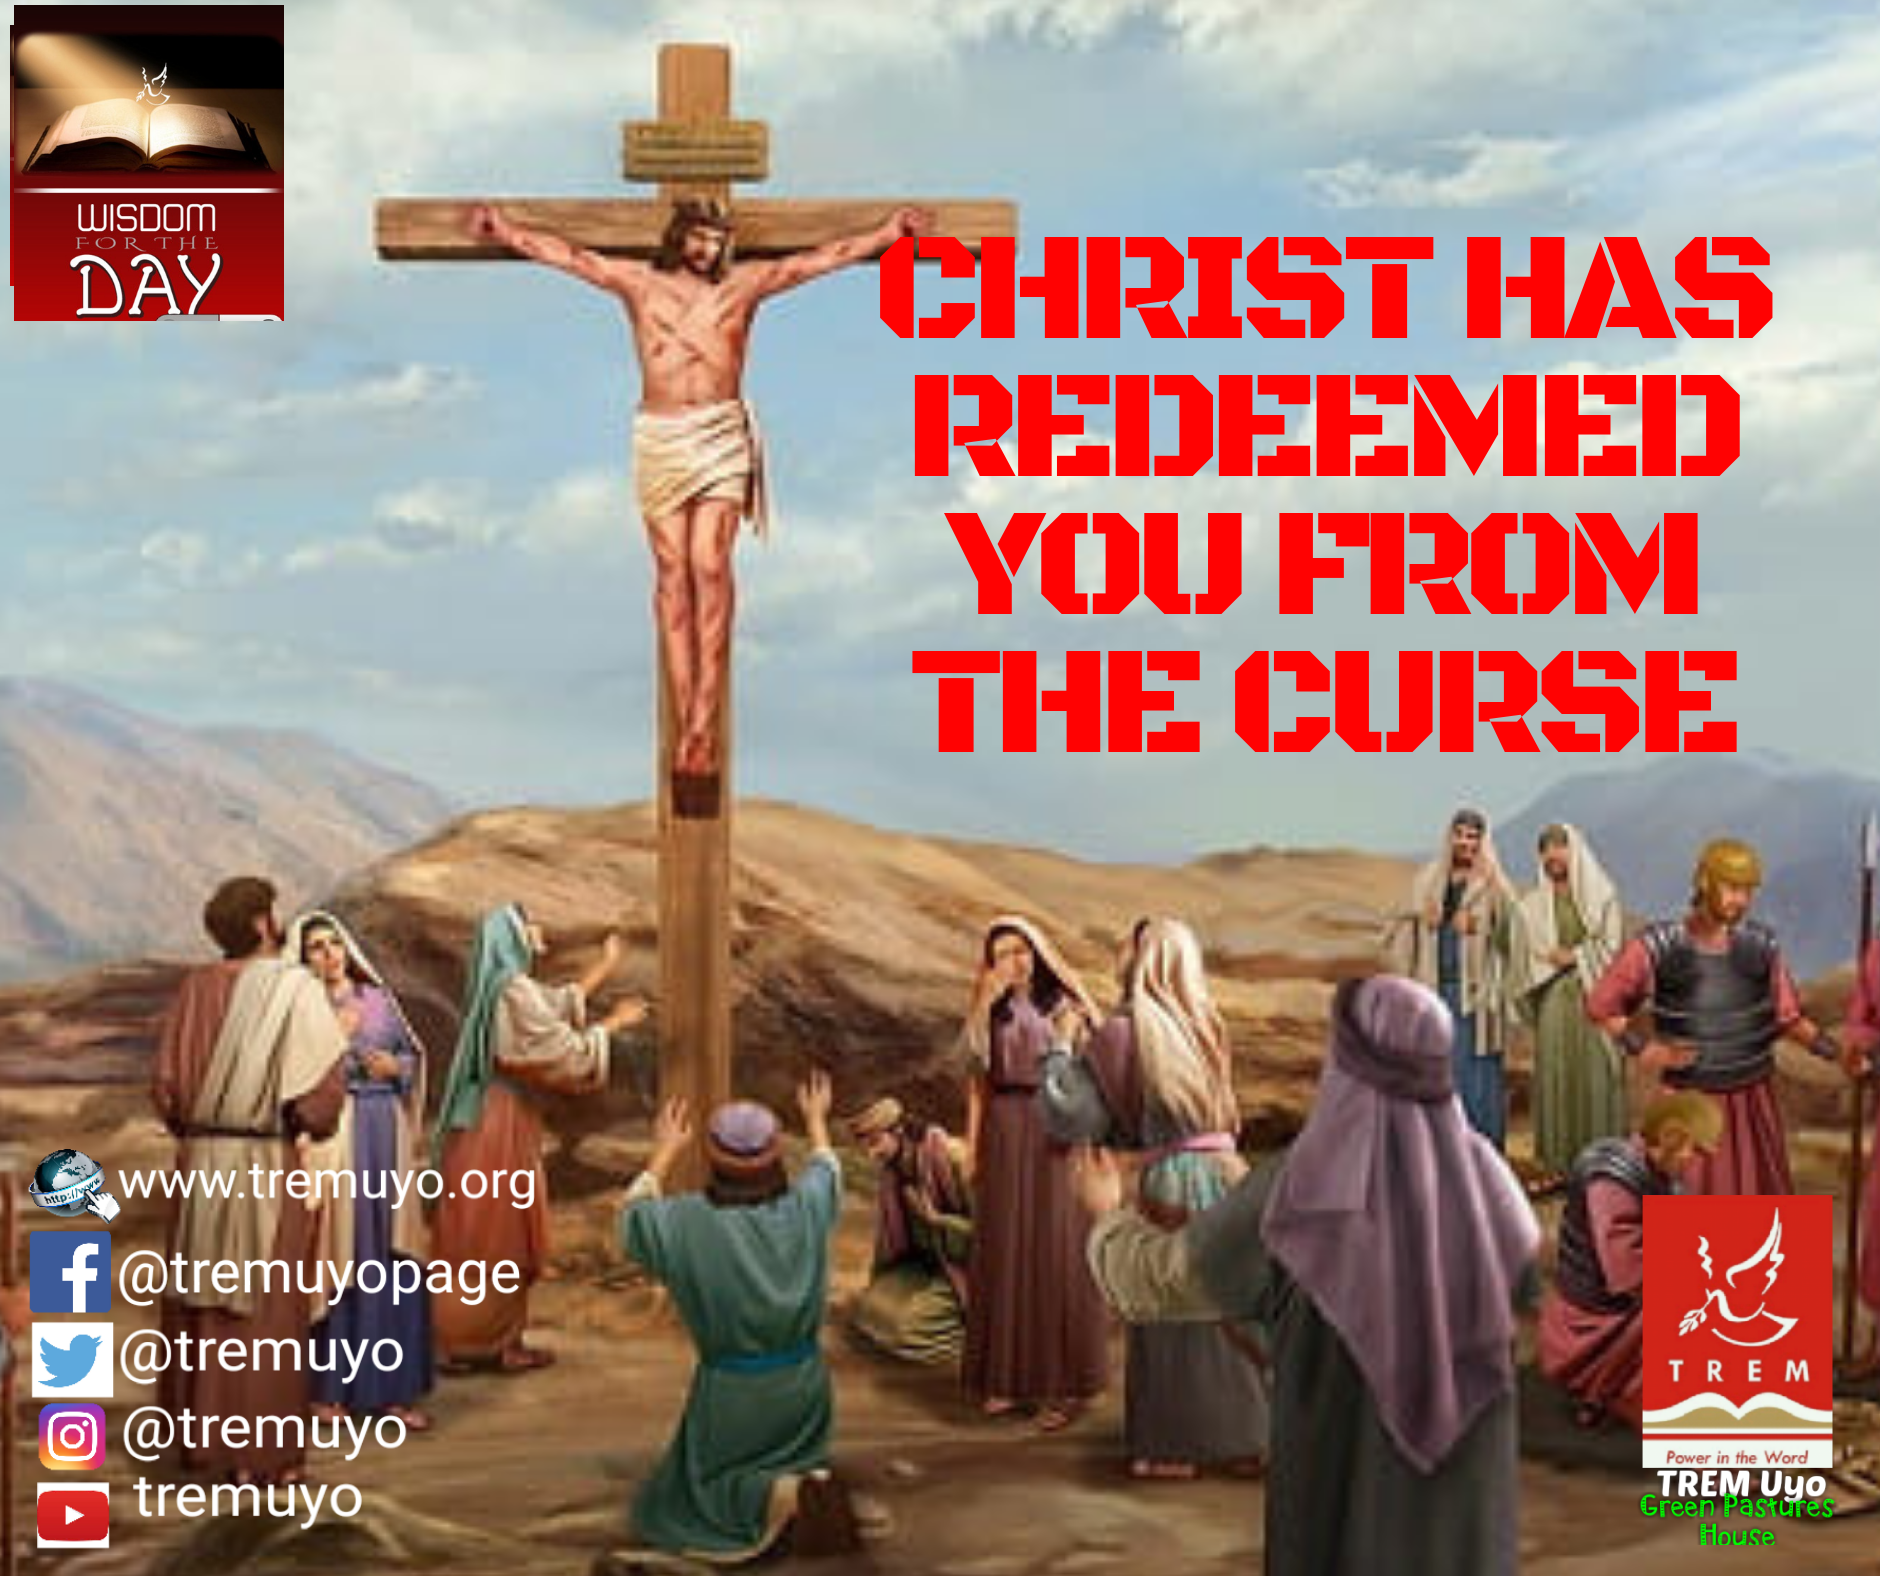 CHRIST HAS REDEEMED YOU FROM THE CURSE